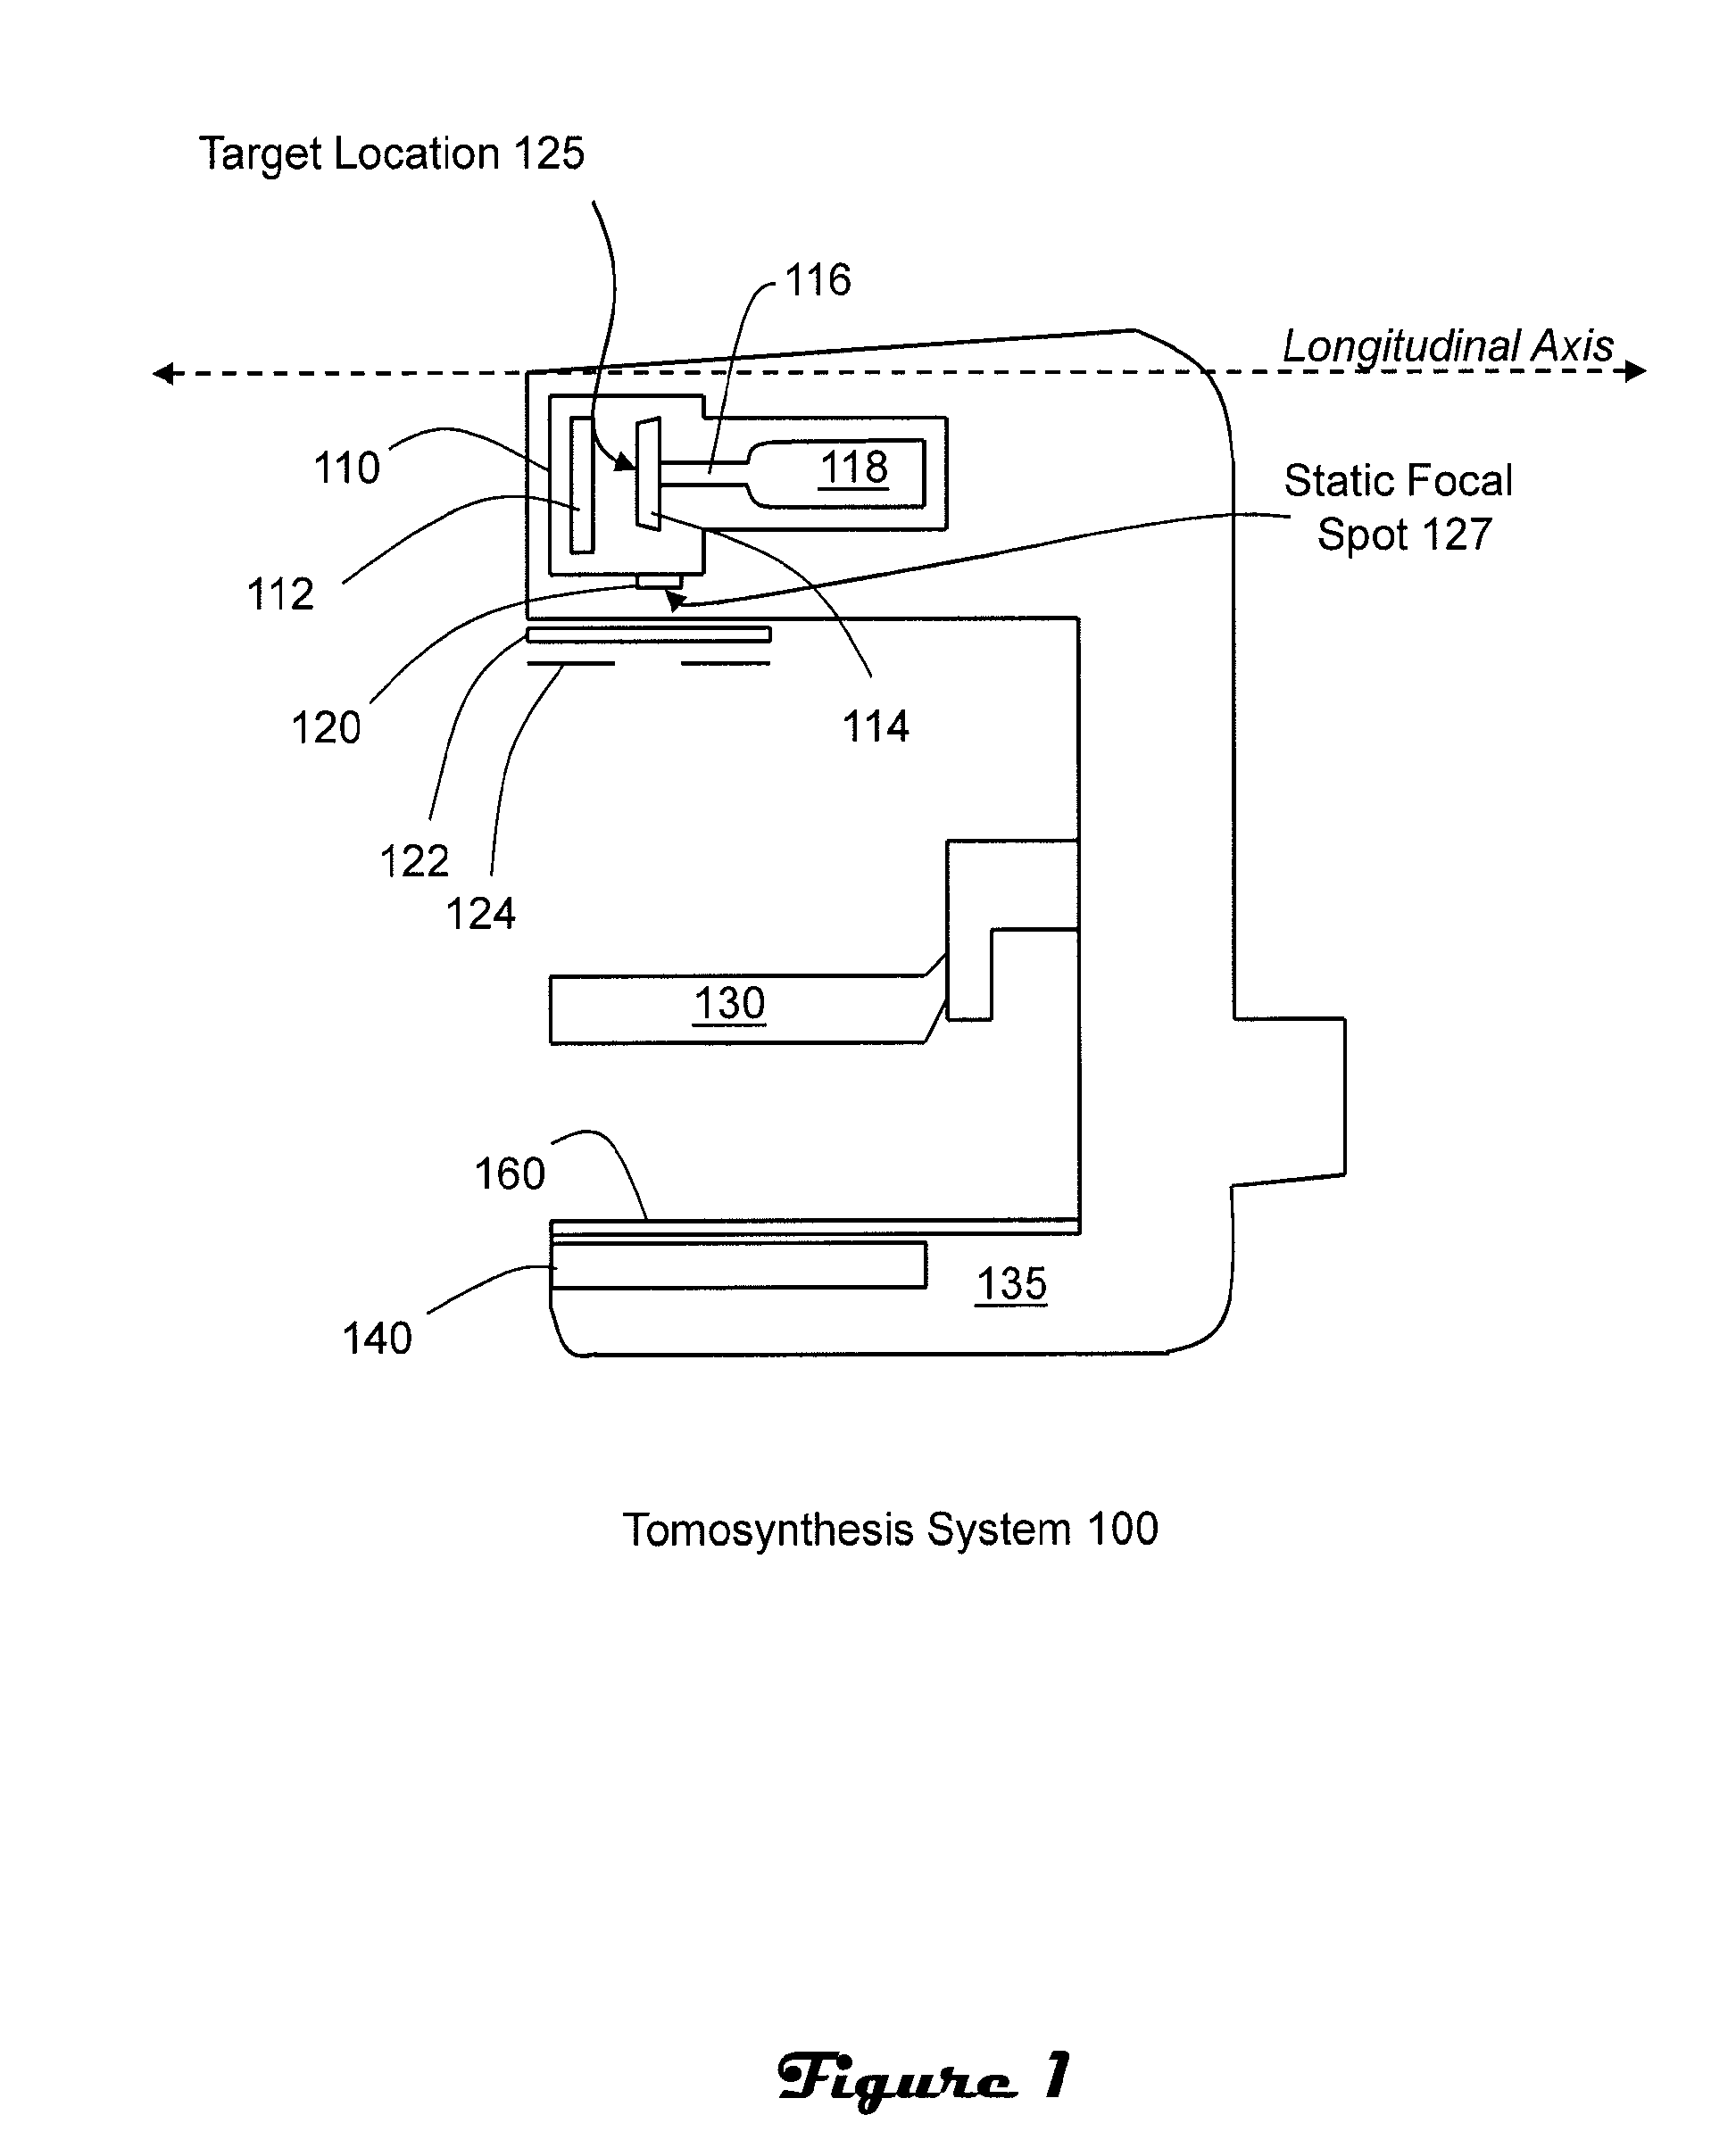 Tomosynthesis with shifting focal spot and oscillating collimator blades